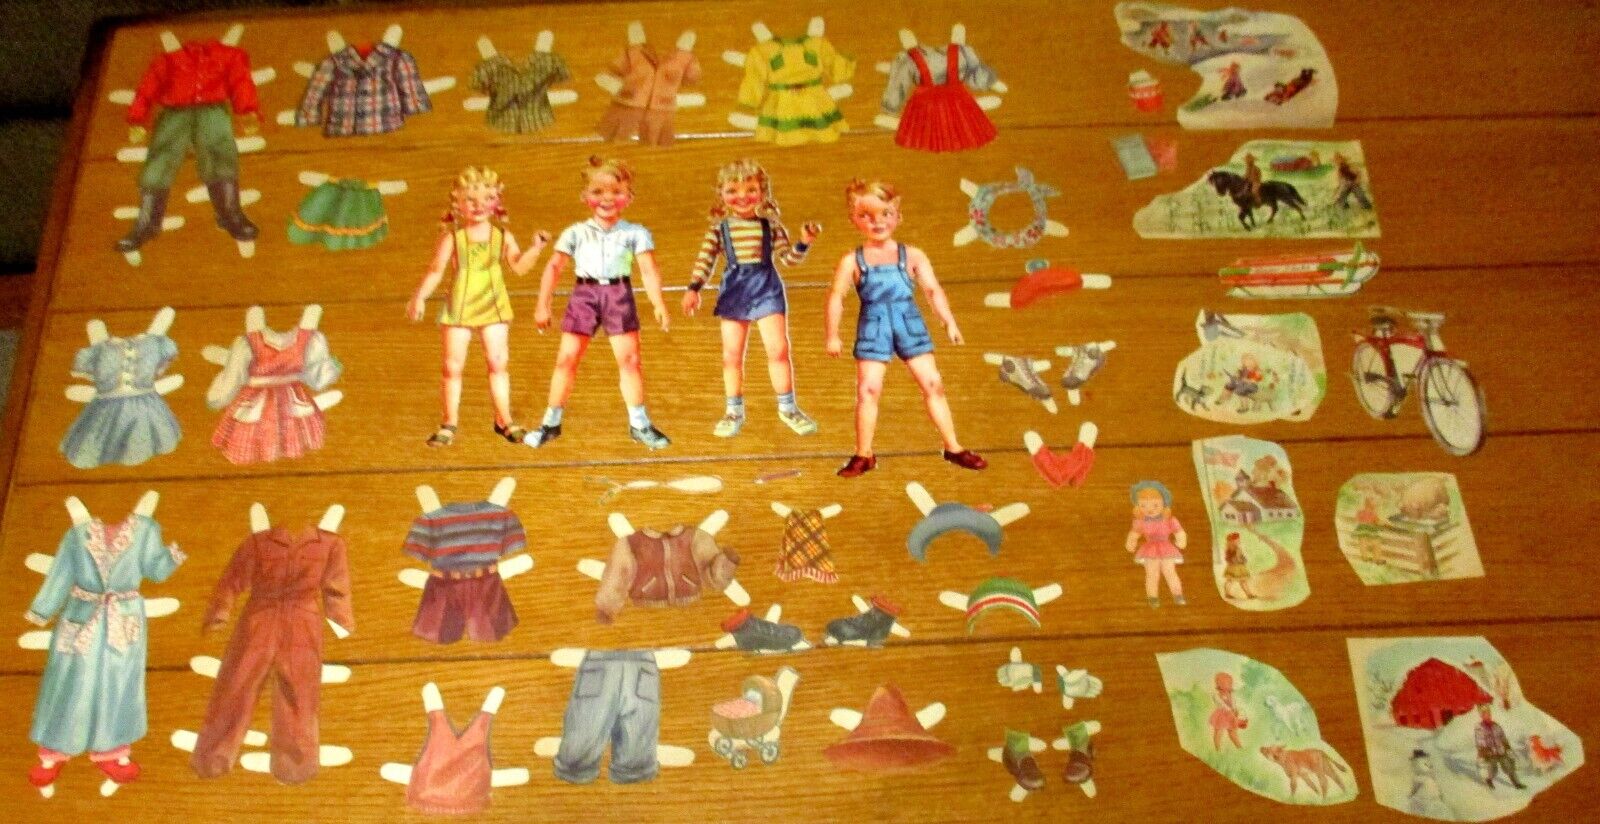 Vintage Paper Doll and Outfit Lot (19) W/ 4 Dolls & 15 Outfits  NICE!!!!     #14 Unbranded